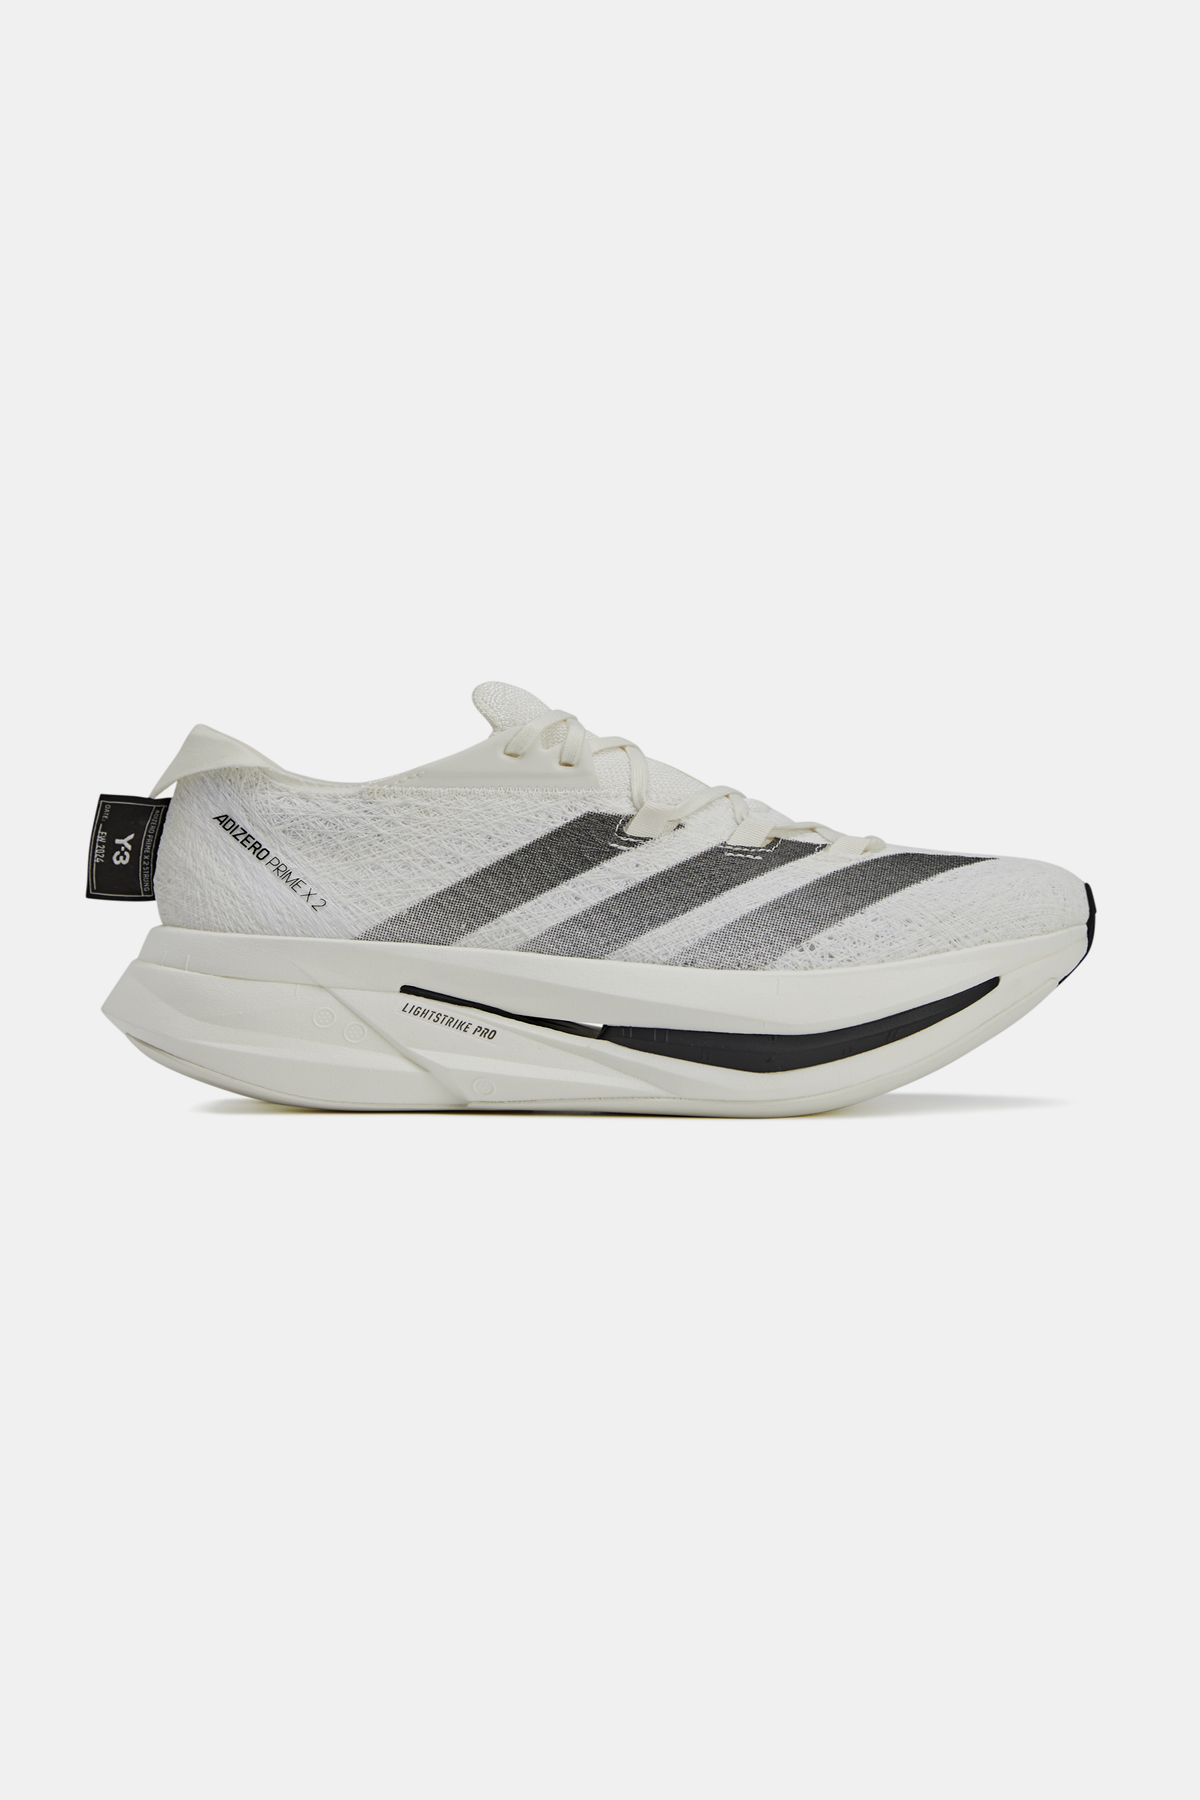 Y-3 Prime X2 Strung Sneakers - Off White / Core Black / Off White